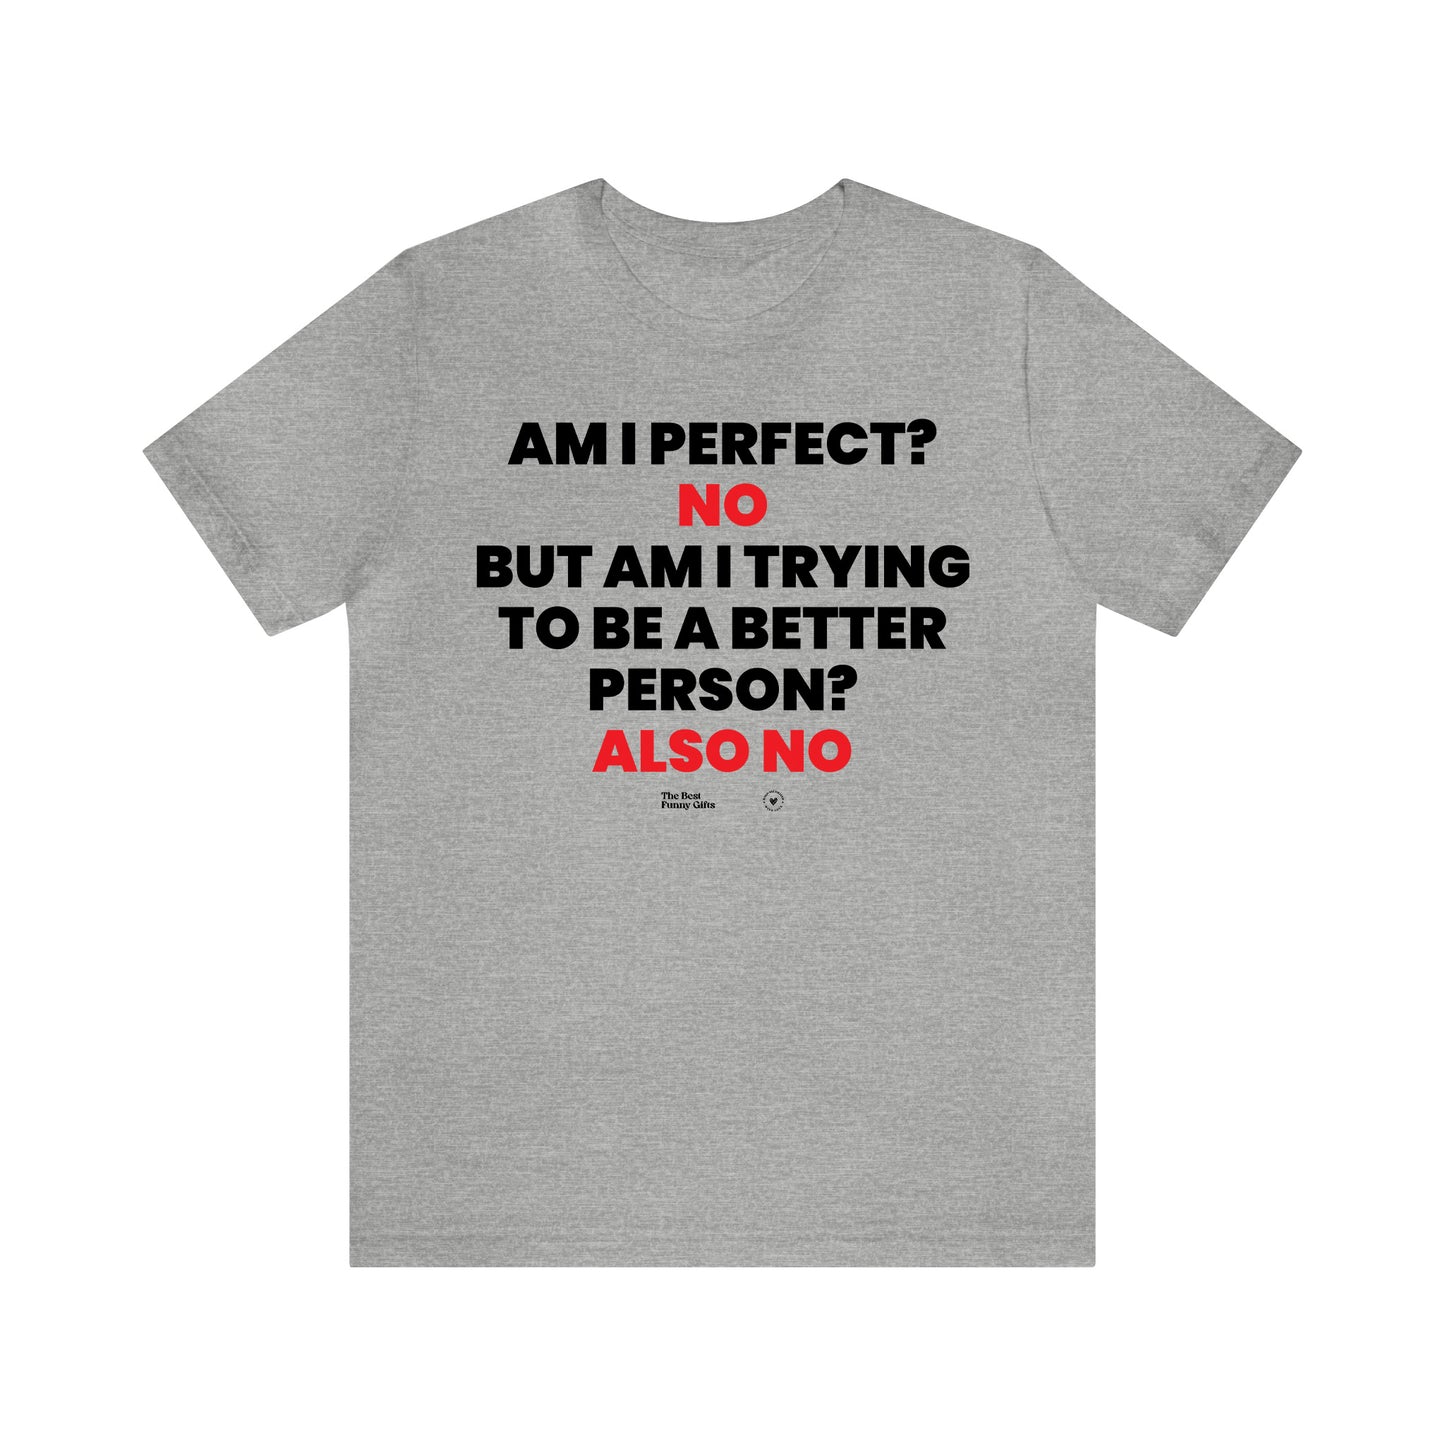 Mens T Shirts - Am I Perfect? No but I Am Trying to Be a Better Person? Also No - Funny Men T Shirts